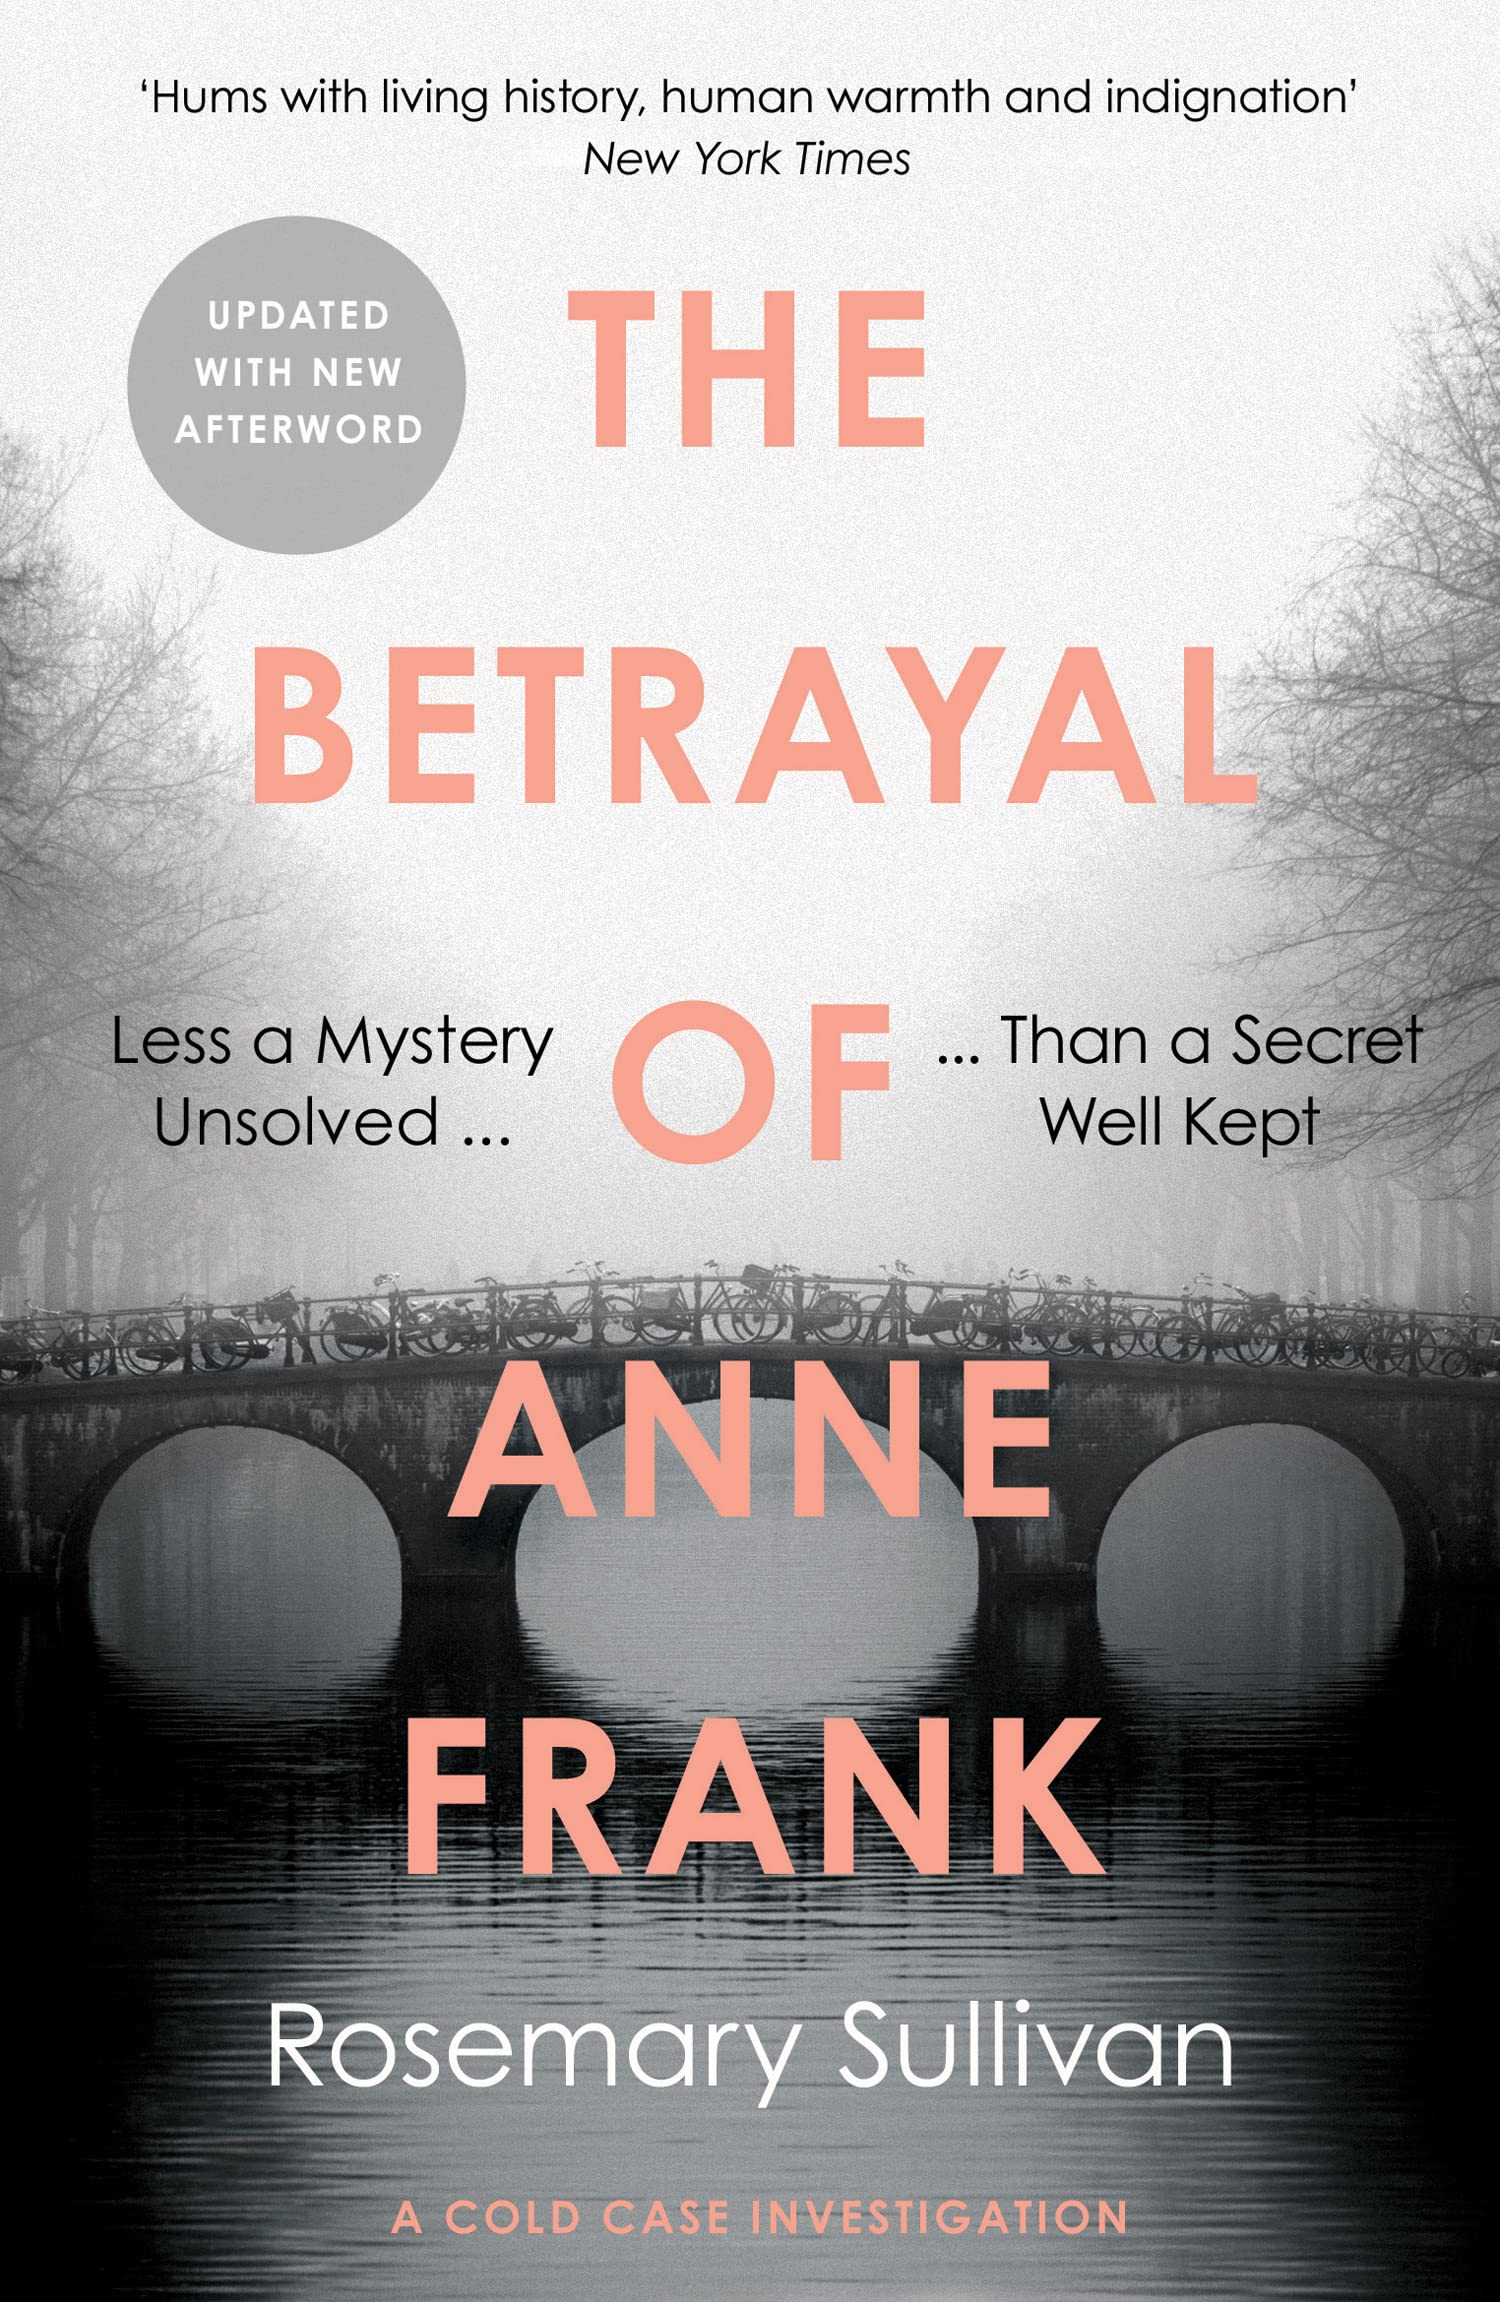 The_Betrayal_of_Anne_Frank_by_Rosemary_Sullivan